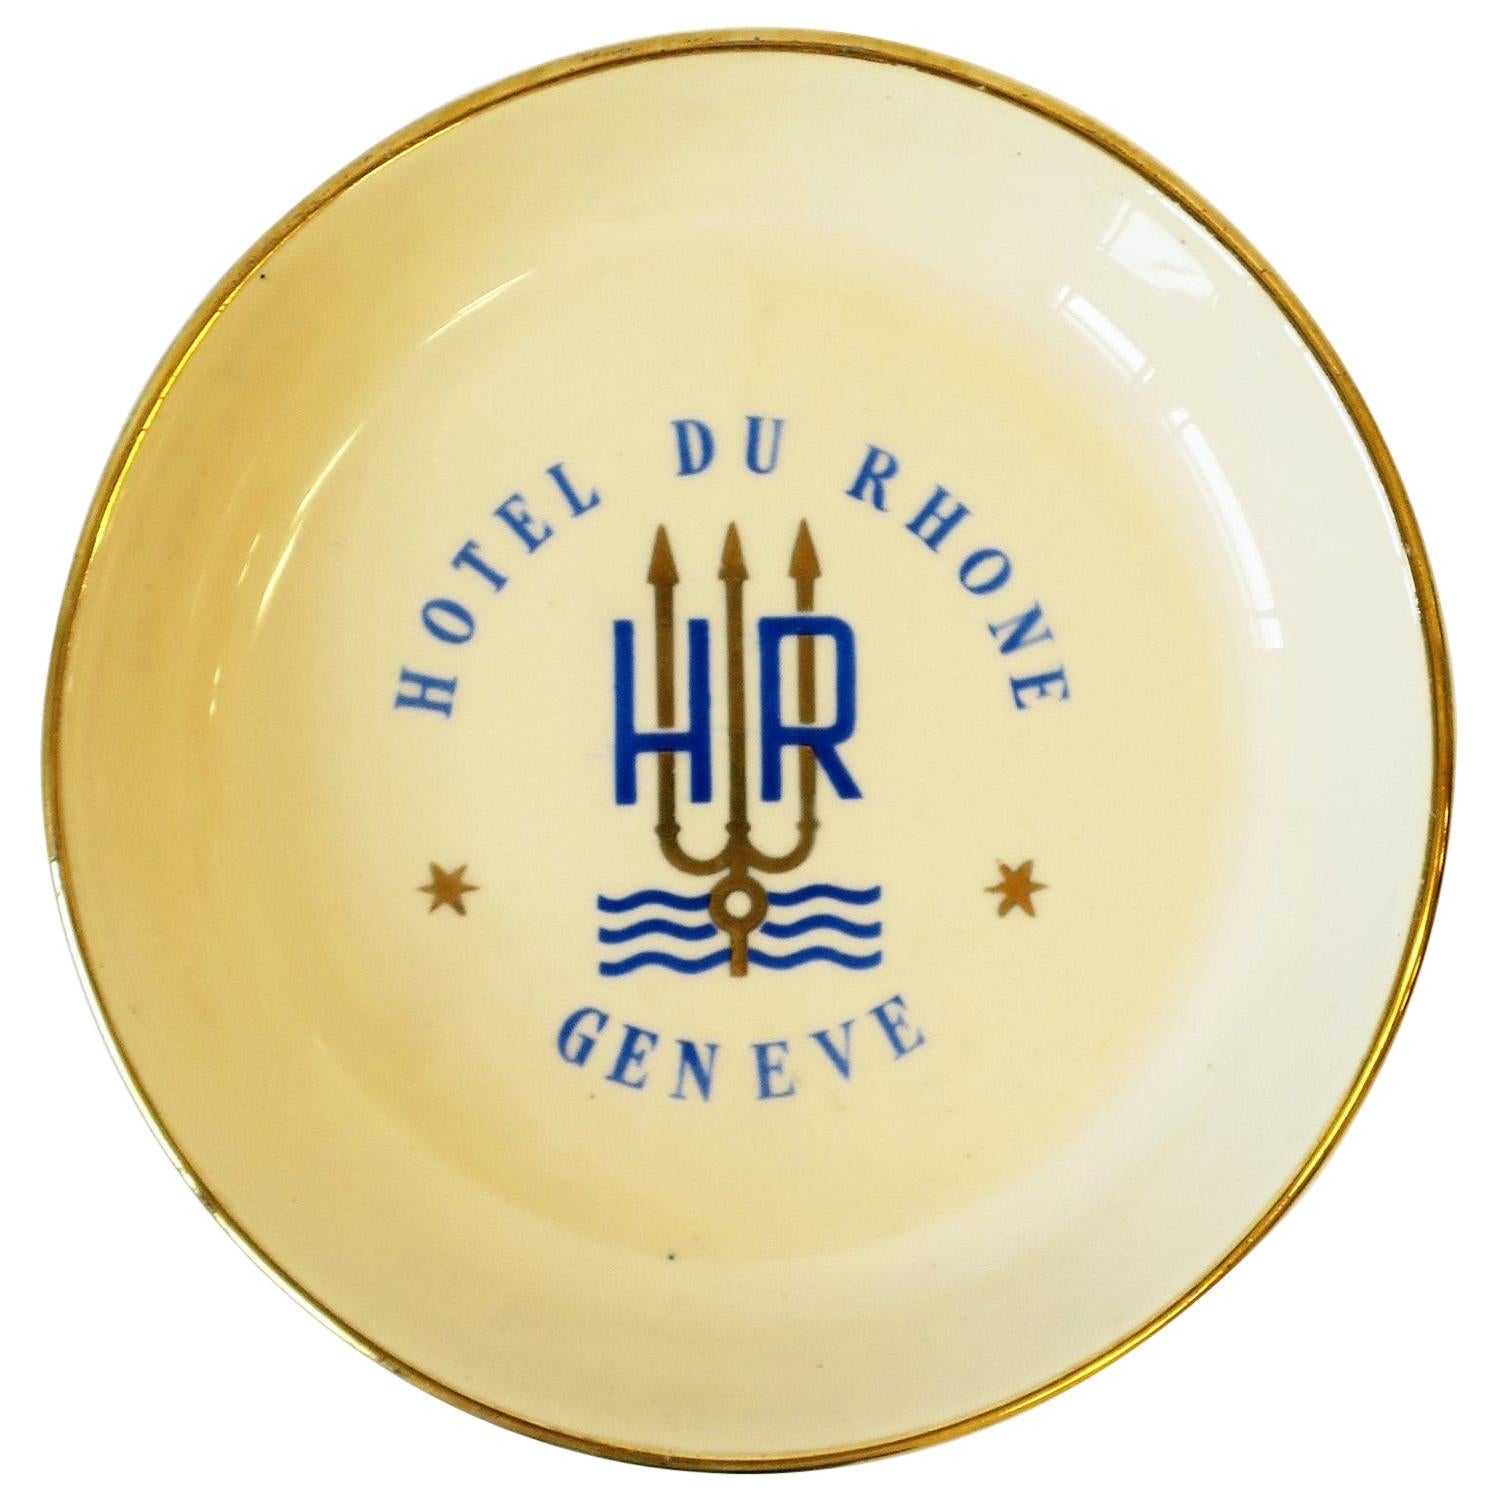 Swiss Hotel Blue and Gold Porcelain Jewelry Dish